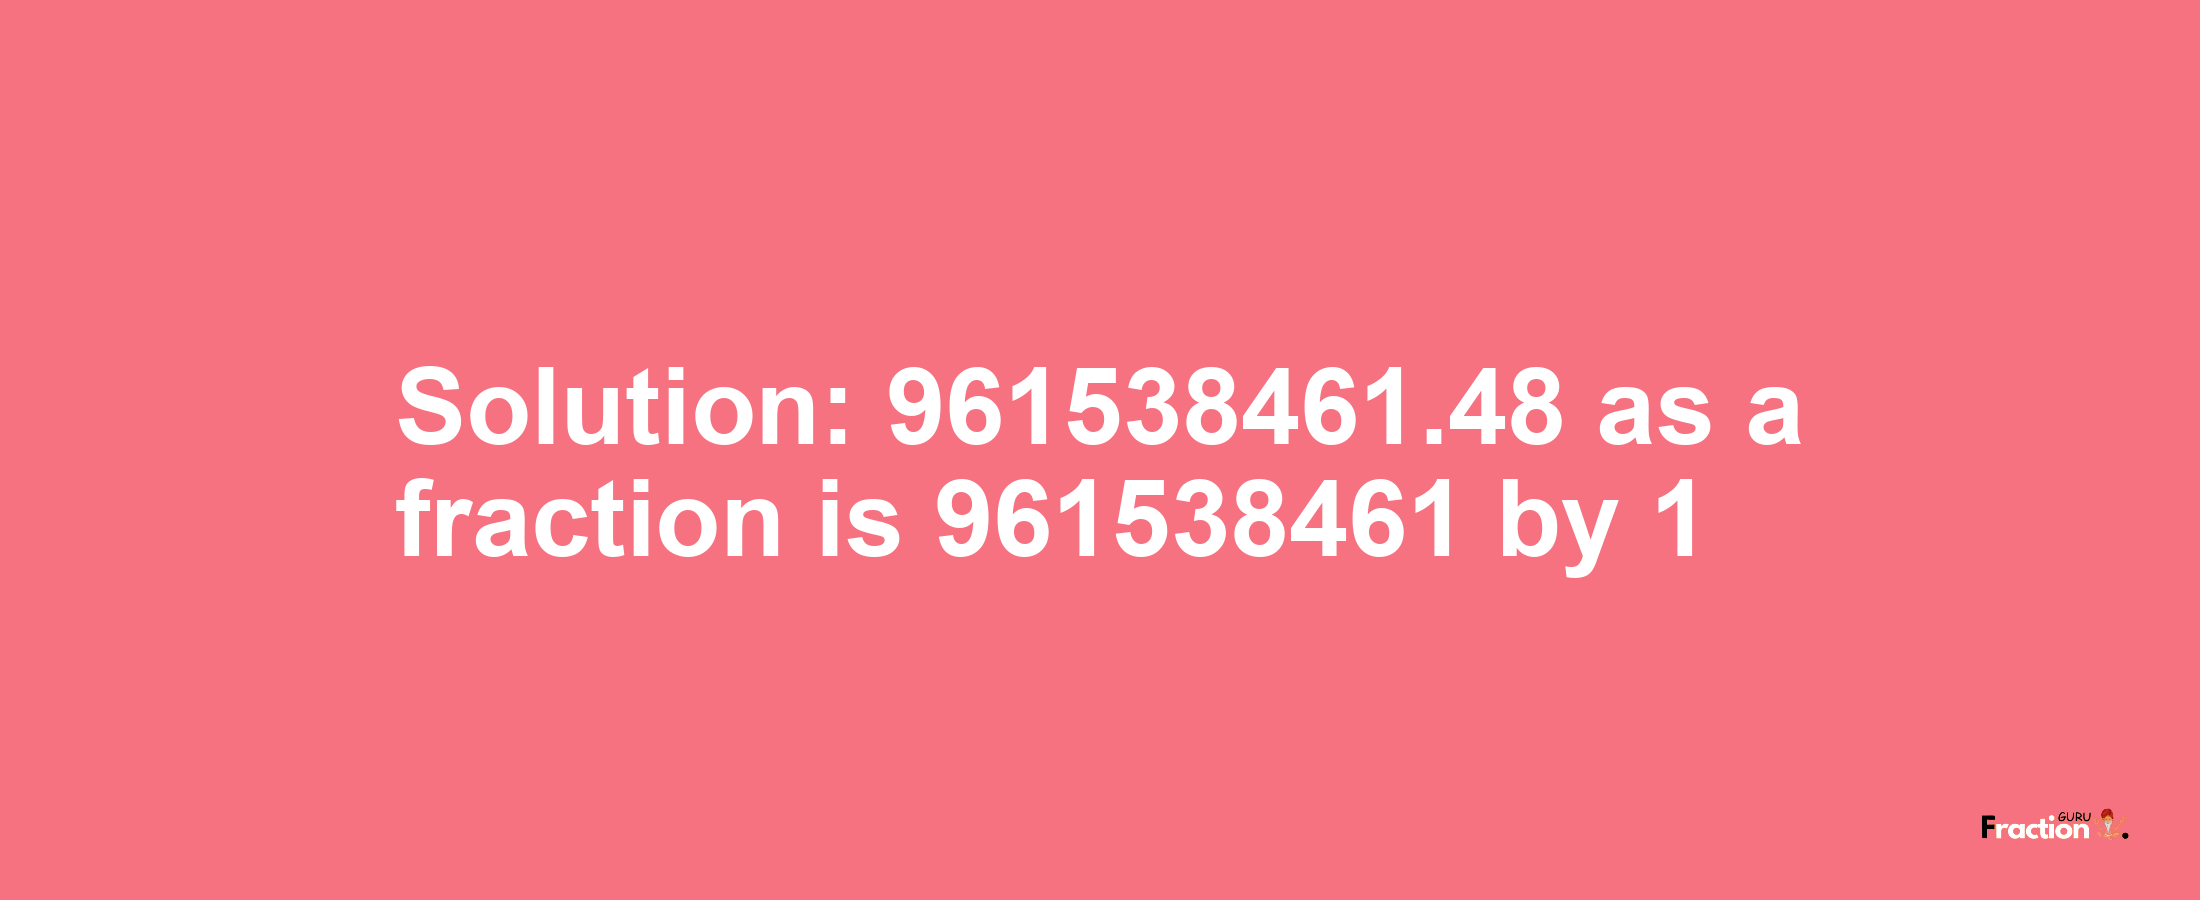 Solution:961538461.48 as a fraction is 961538461/1